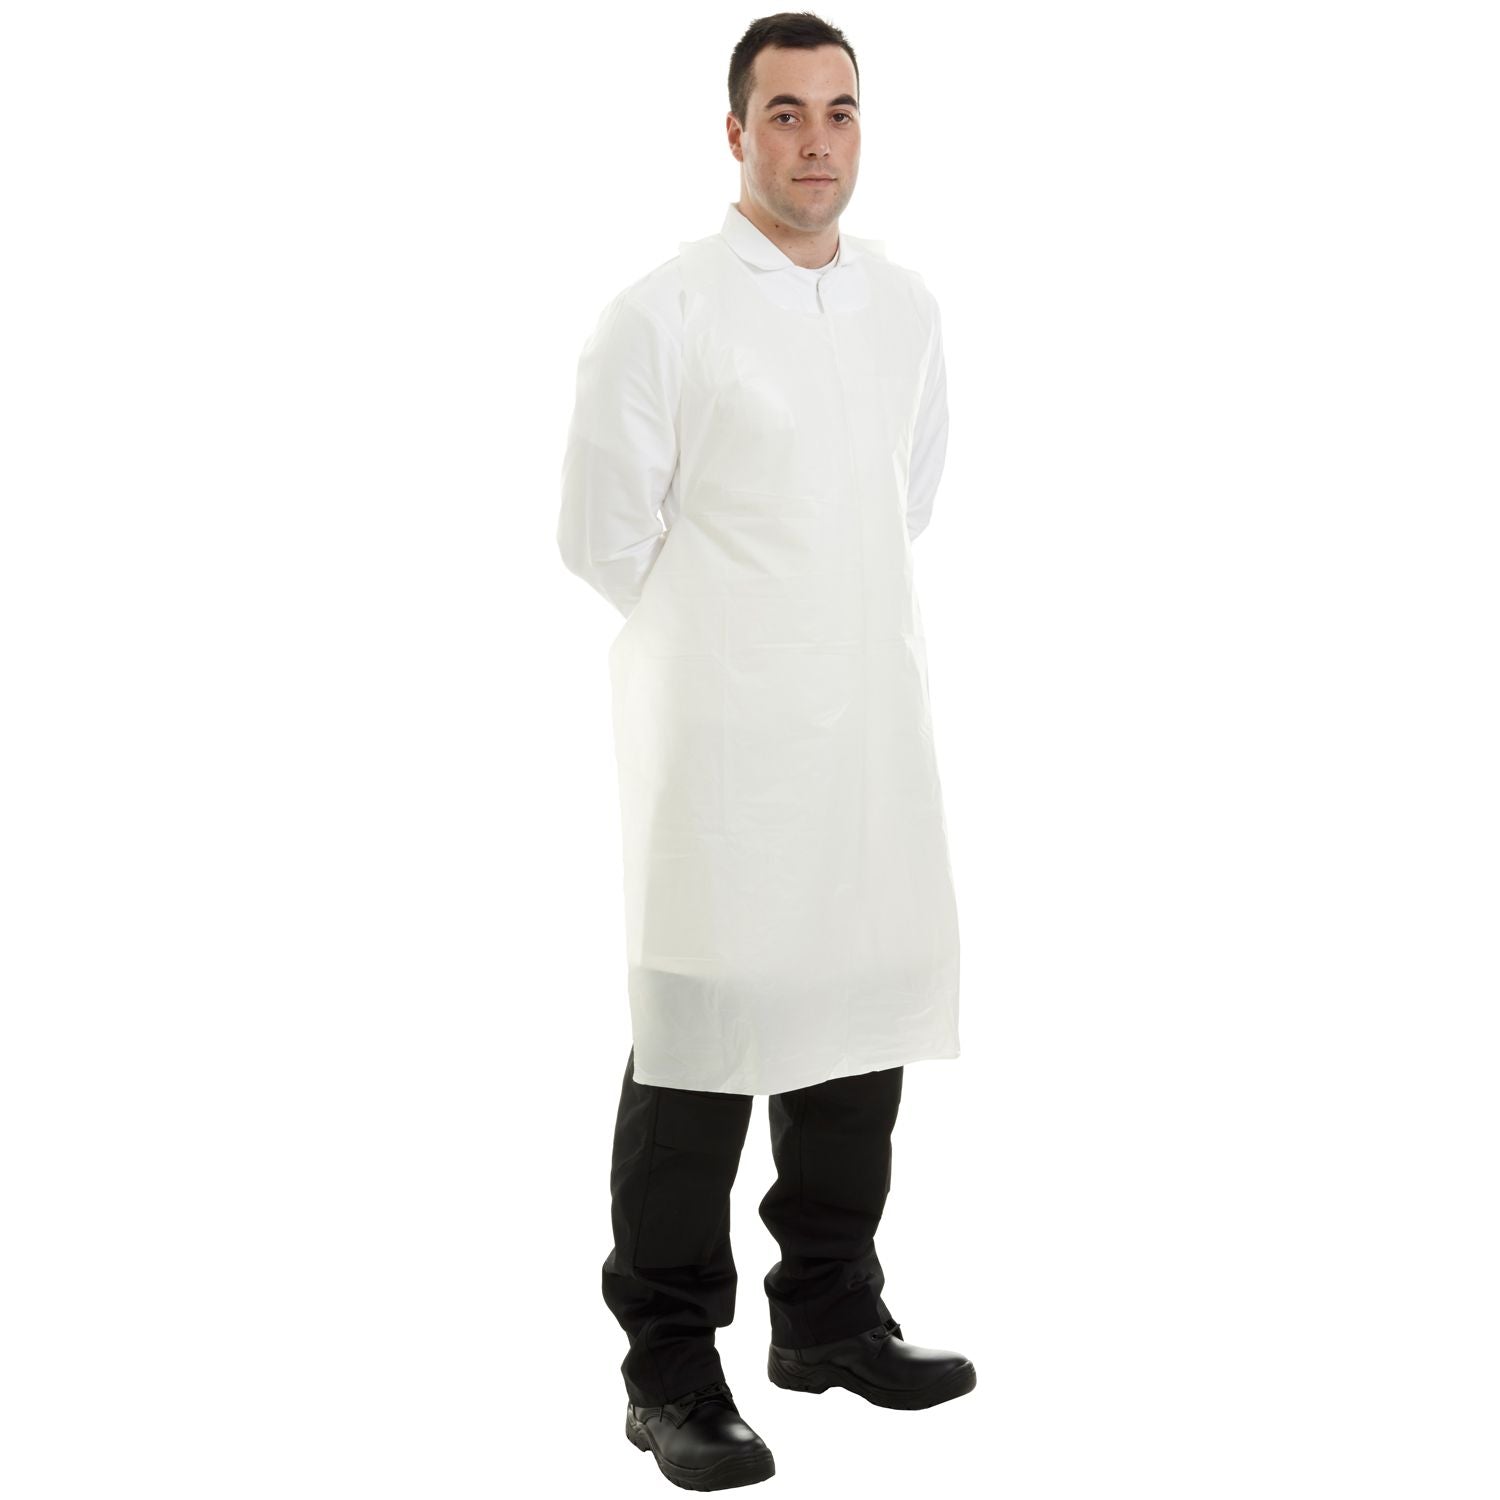 Supertouch PE Aprons - 50 Micron